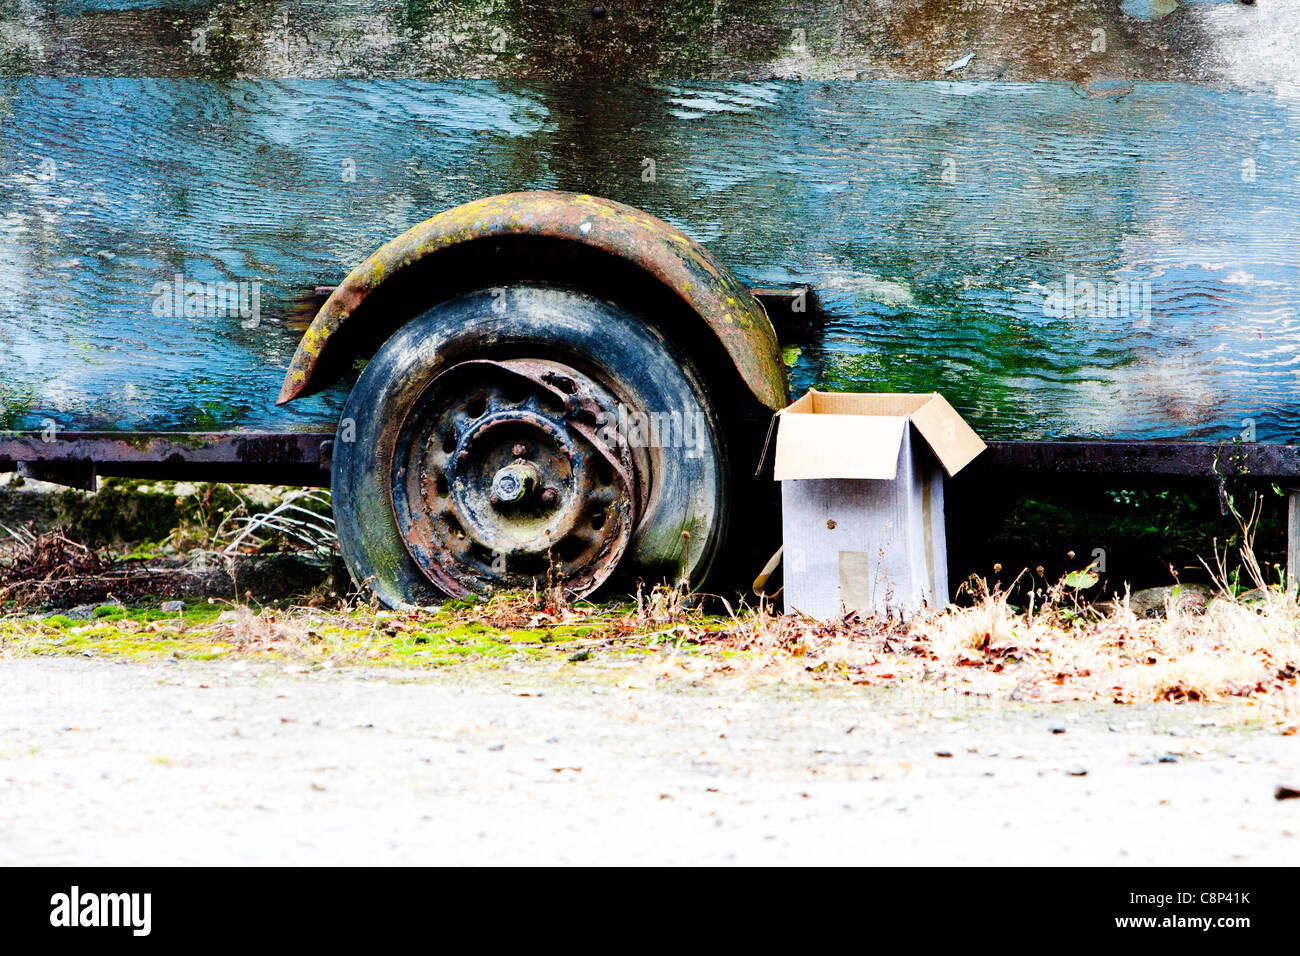 An old wheel on an abandoned truck Stock Photo